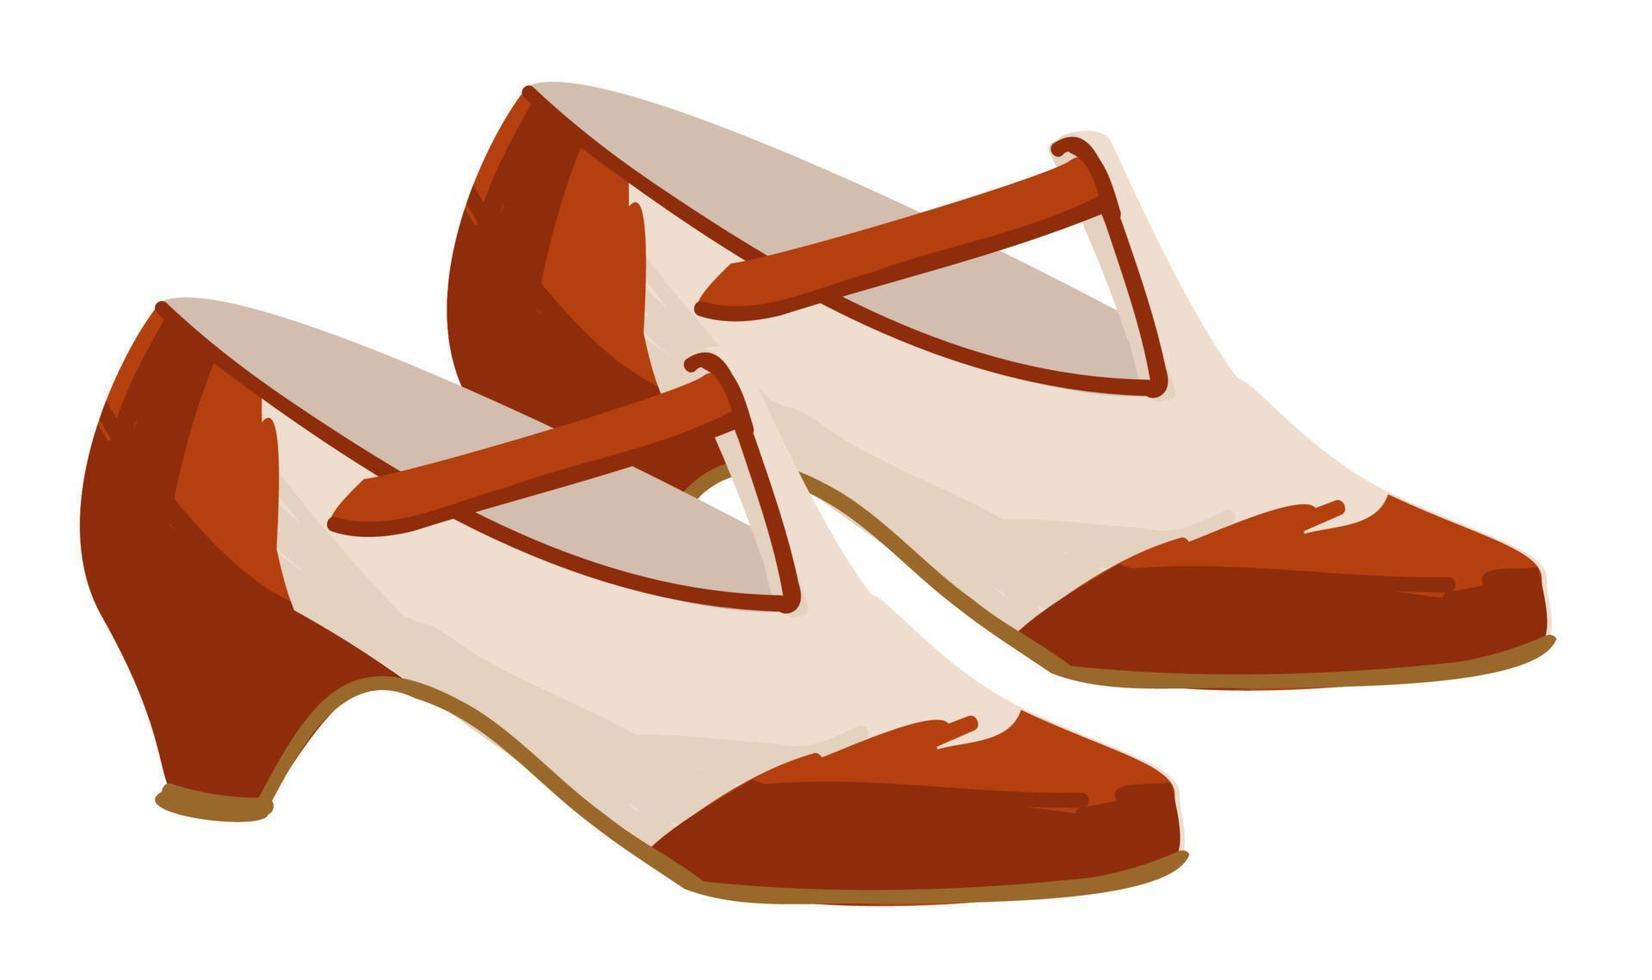 Shoes and women clothes trends, footwear of 1950s vector